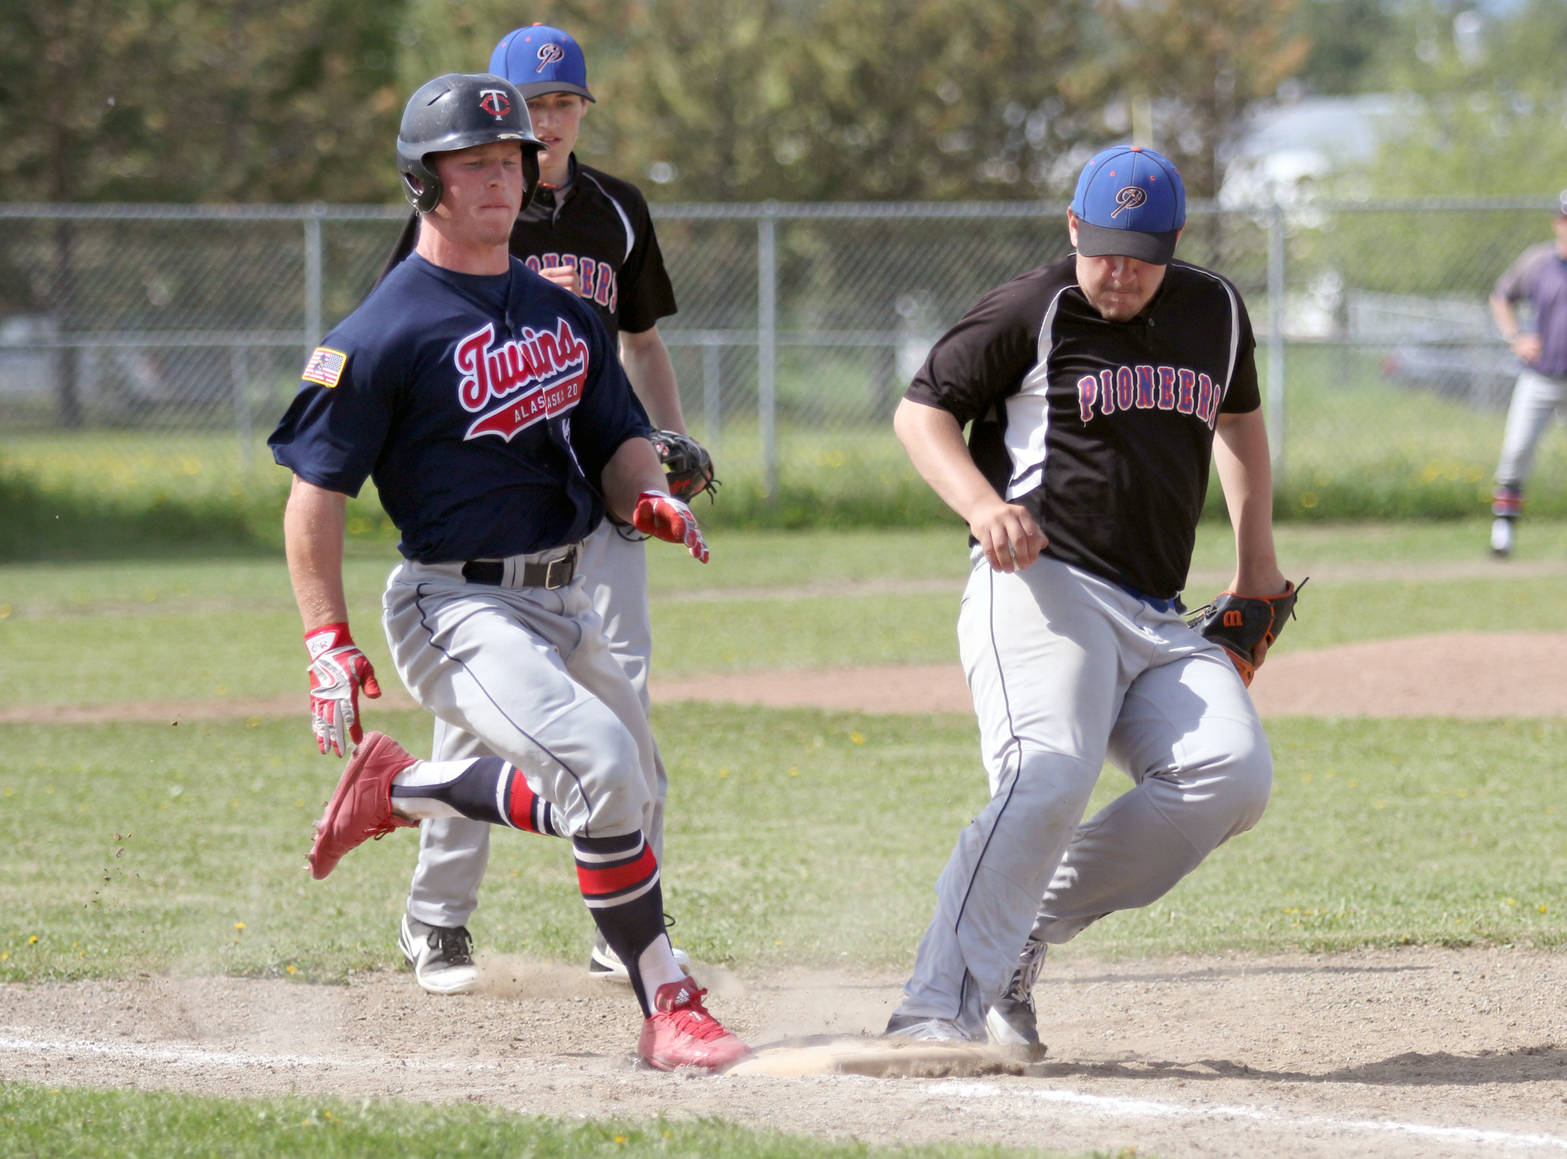 Kenai’s Paul Steffenson beats Palmer’s Zach Satterly to the bag during a play at first base in a 10-7 loss to the Pioneers on Sunday, June 10, 2018, in Palmer. (Photo by Jeremiah Bartz/Frontiersman)